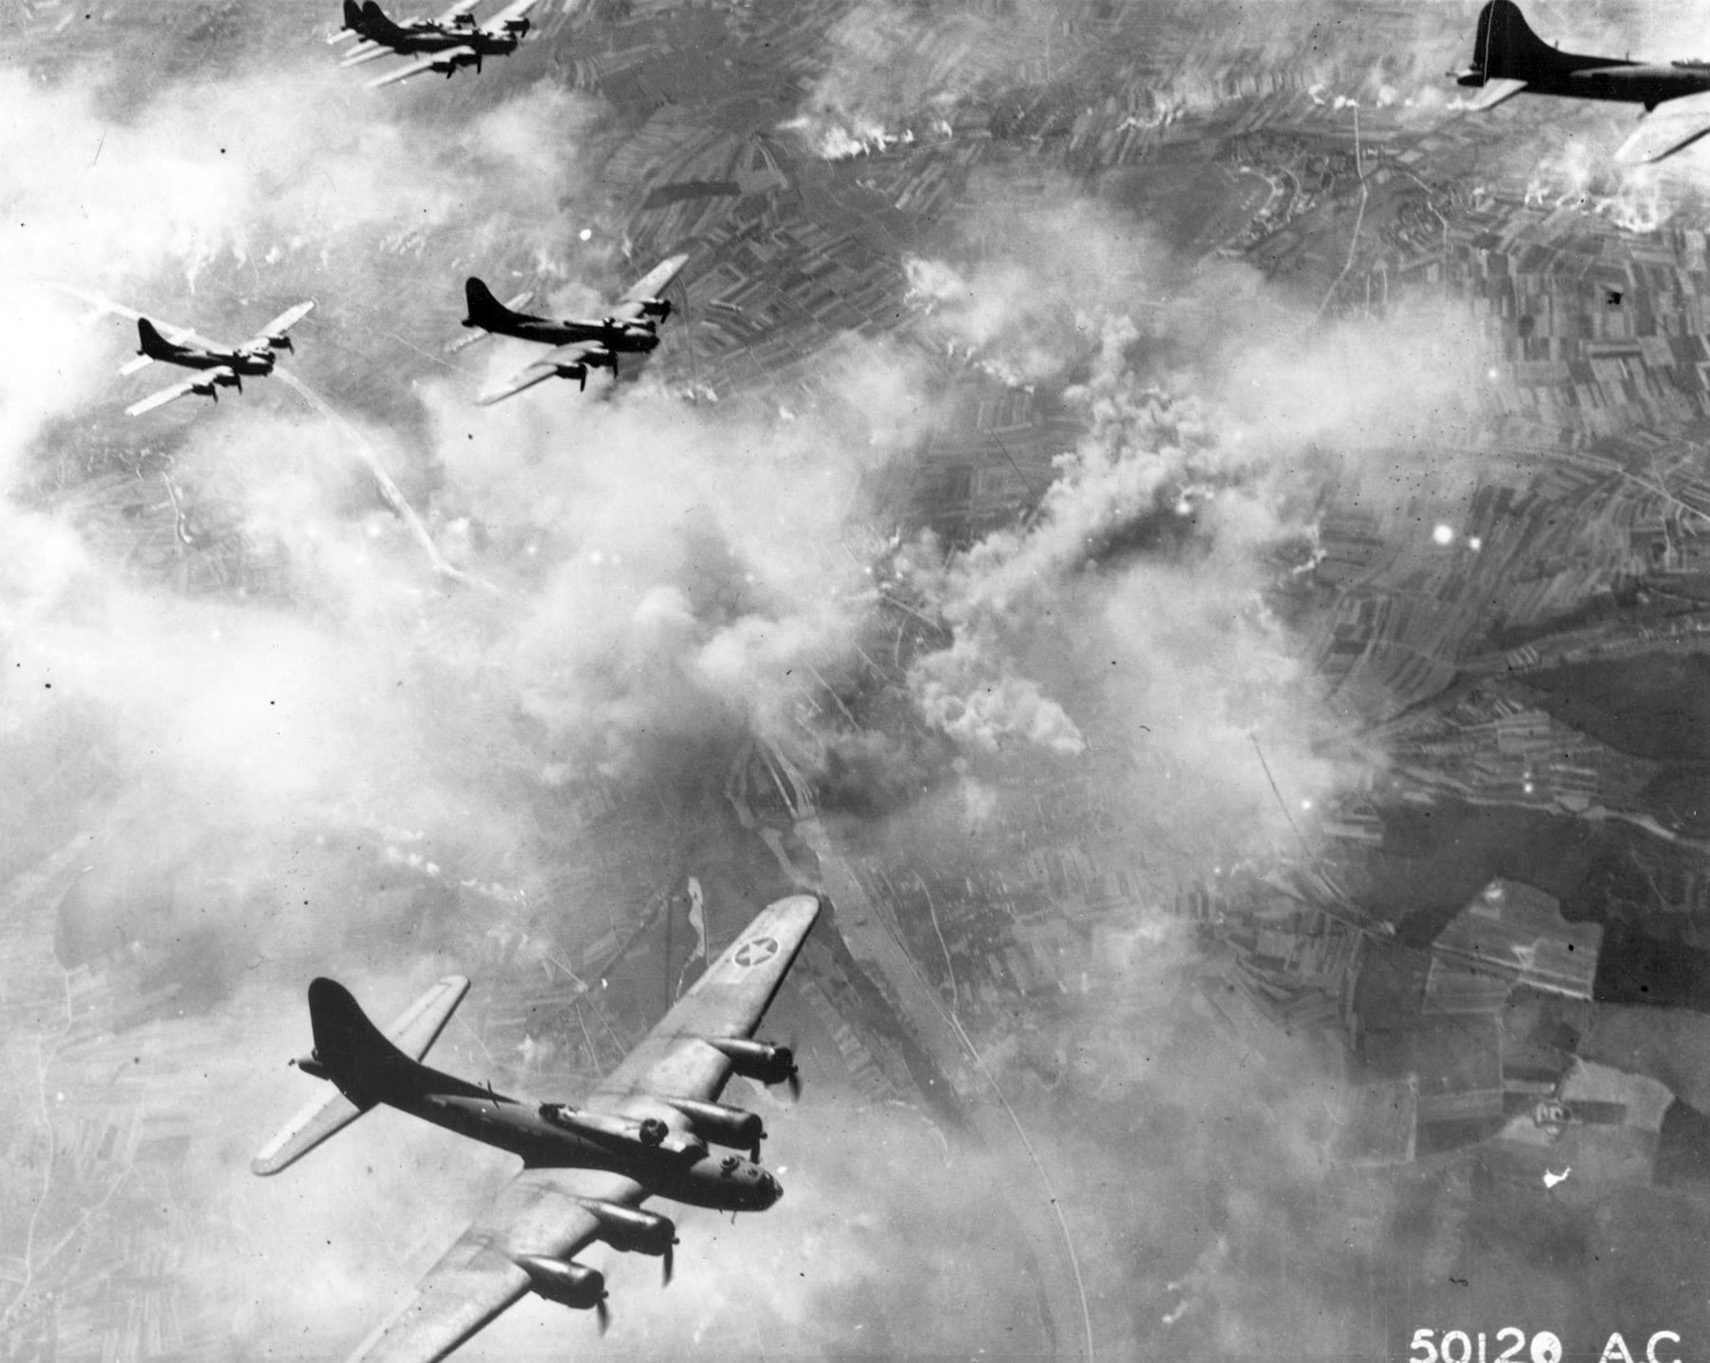 Boeing B-17 heavy bombers stream through the skies above Schweinfurt, Germany, during a bombing mission on August 17, 1943. The mission was one of many costly U.S. Eighth Air Force daylight raids on the Third Reich. 